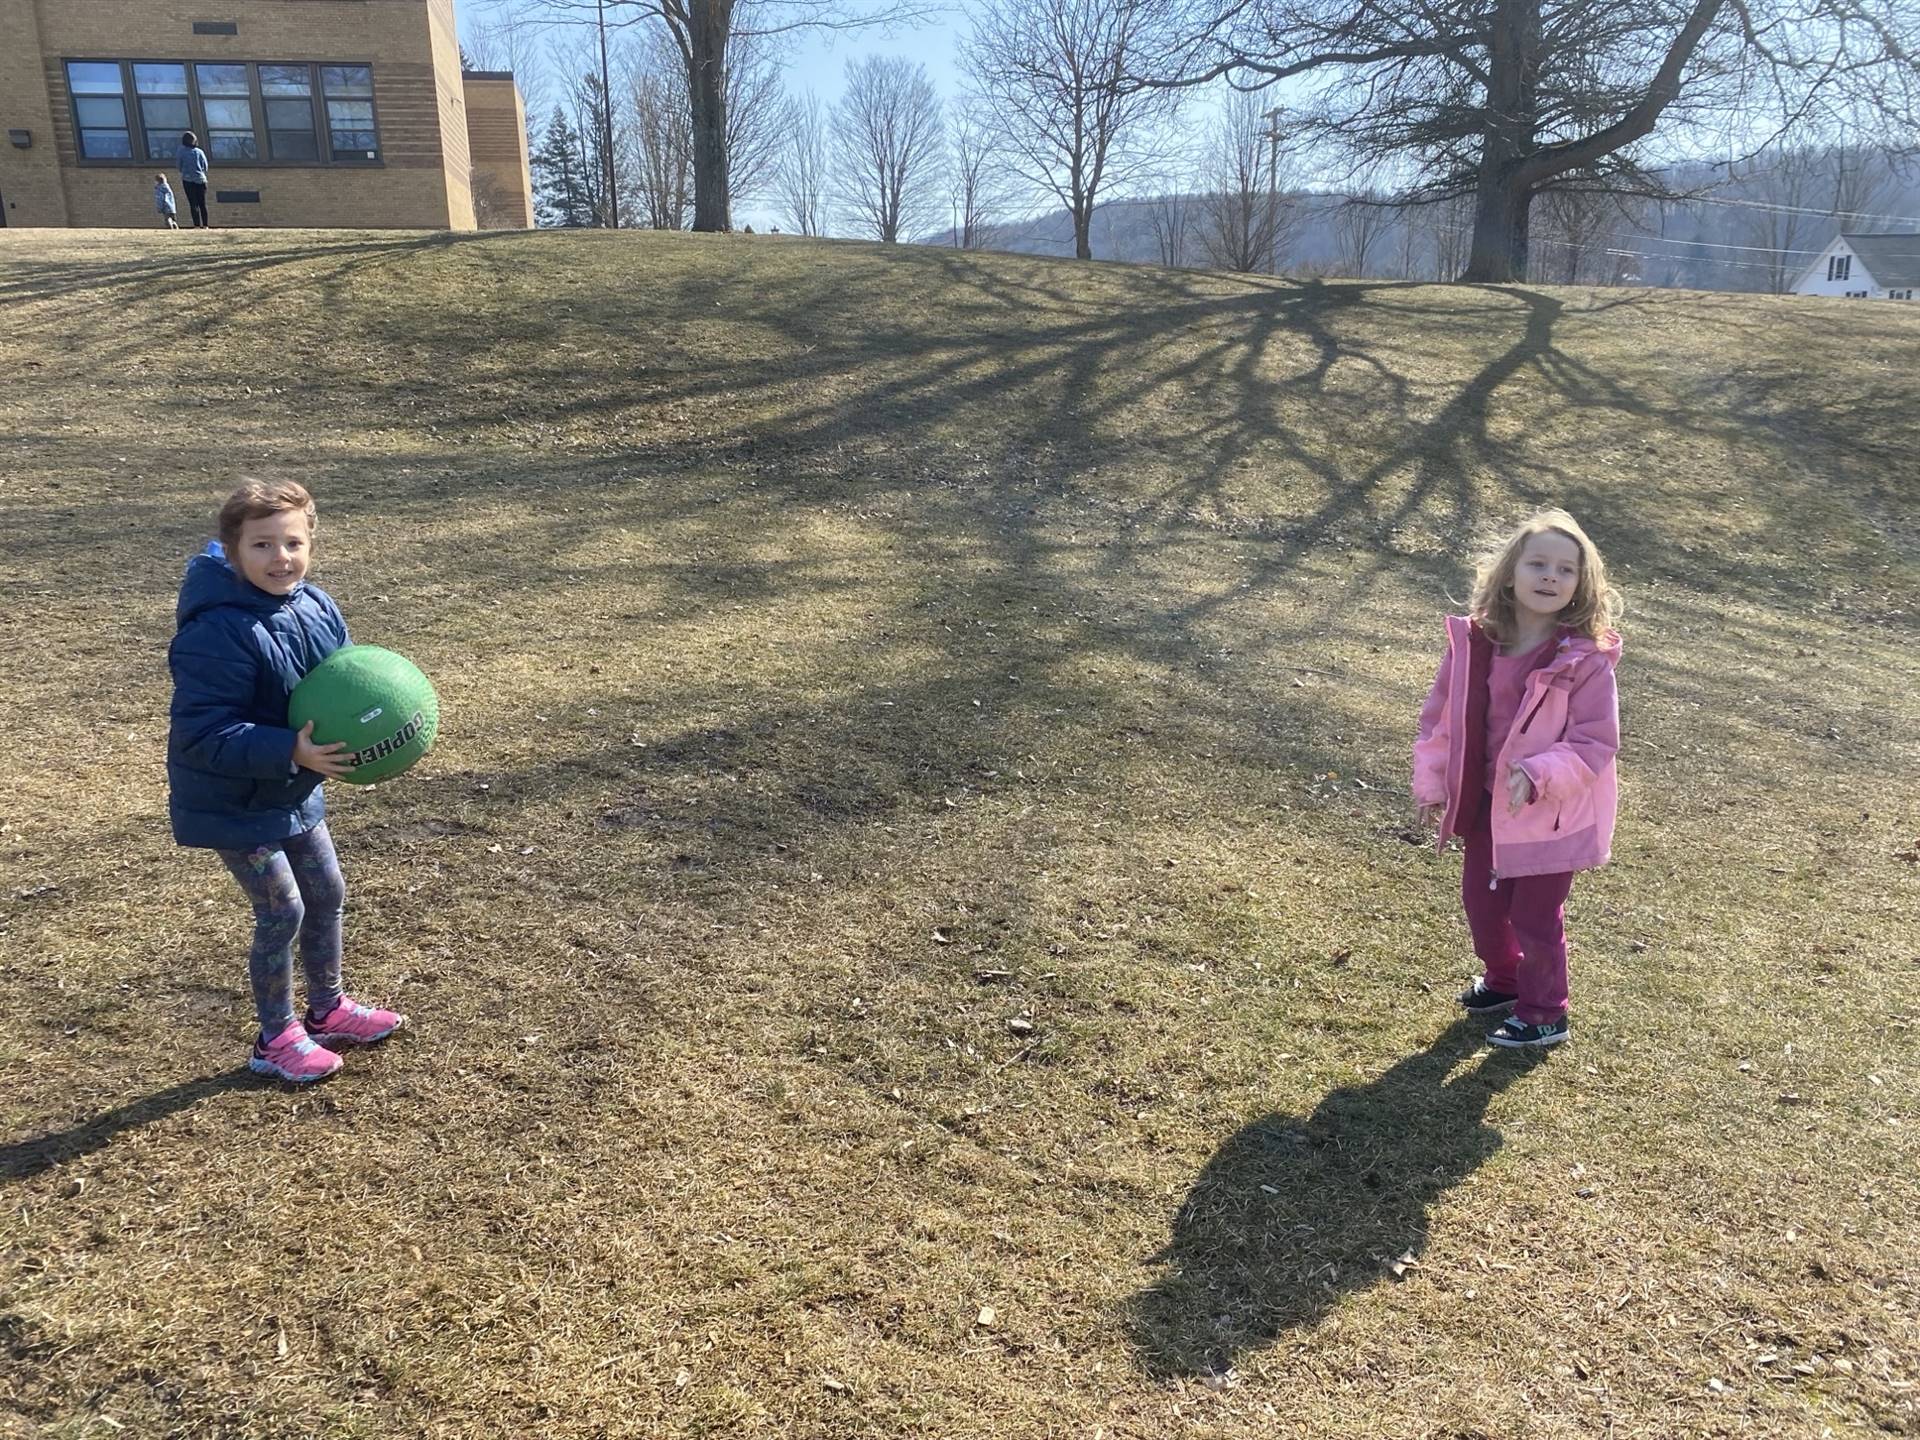 2 students playing toss with a ball outside